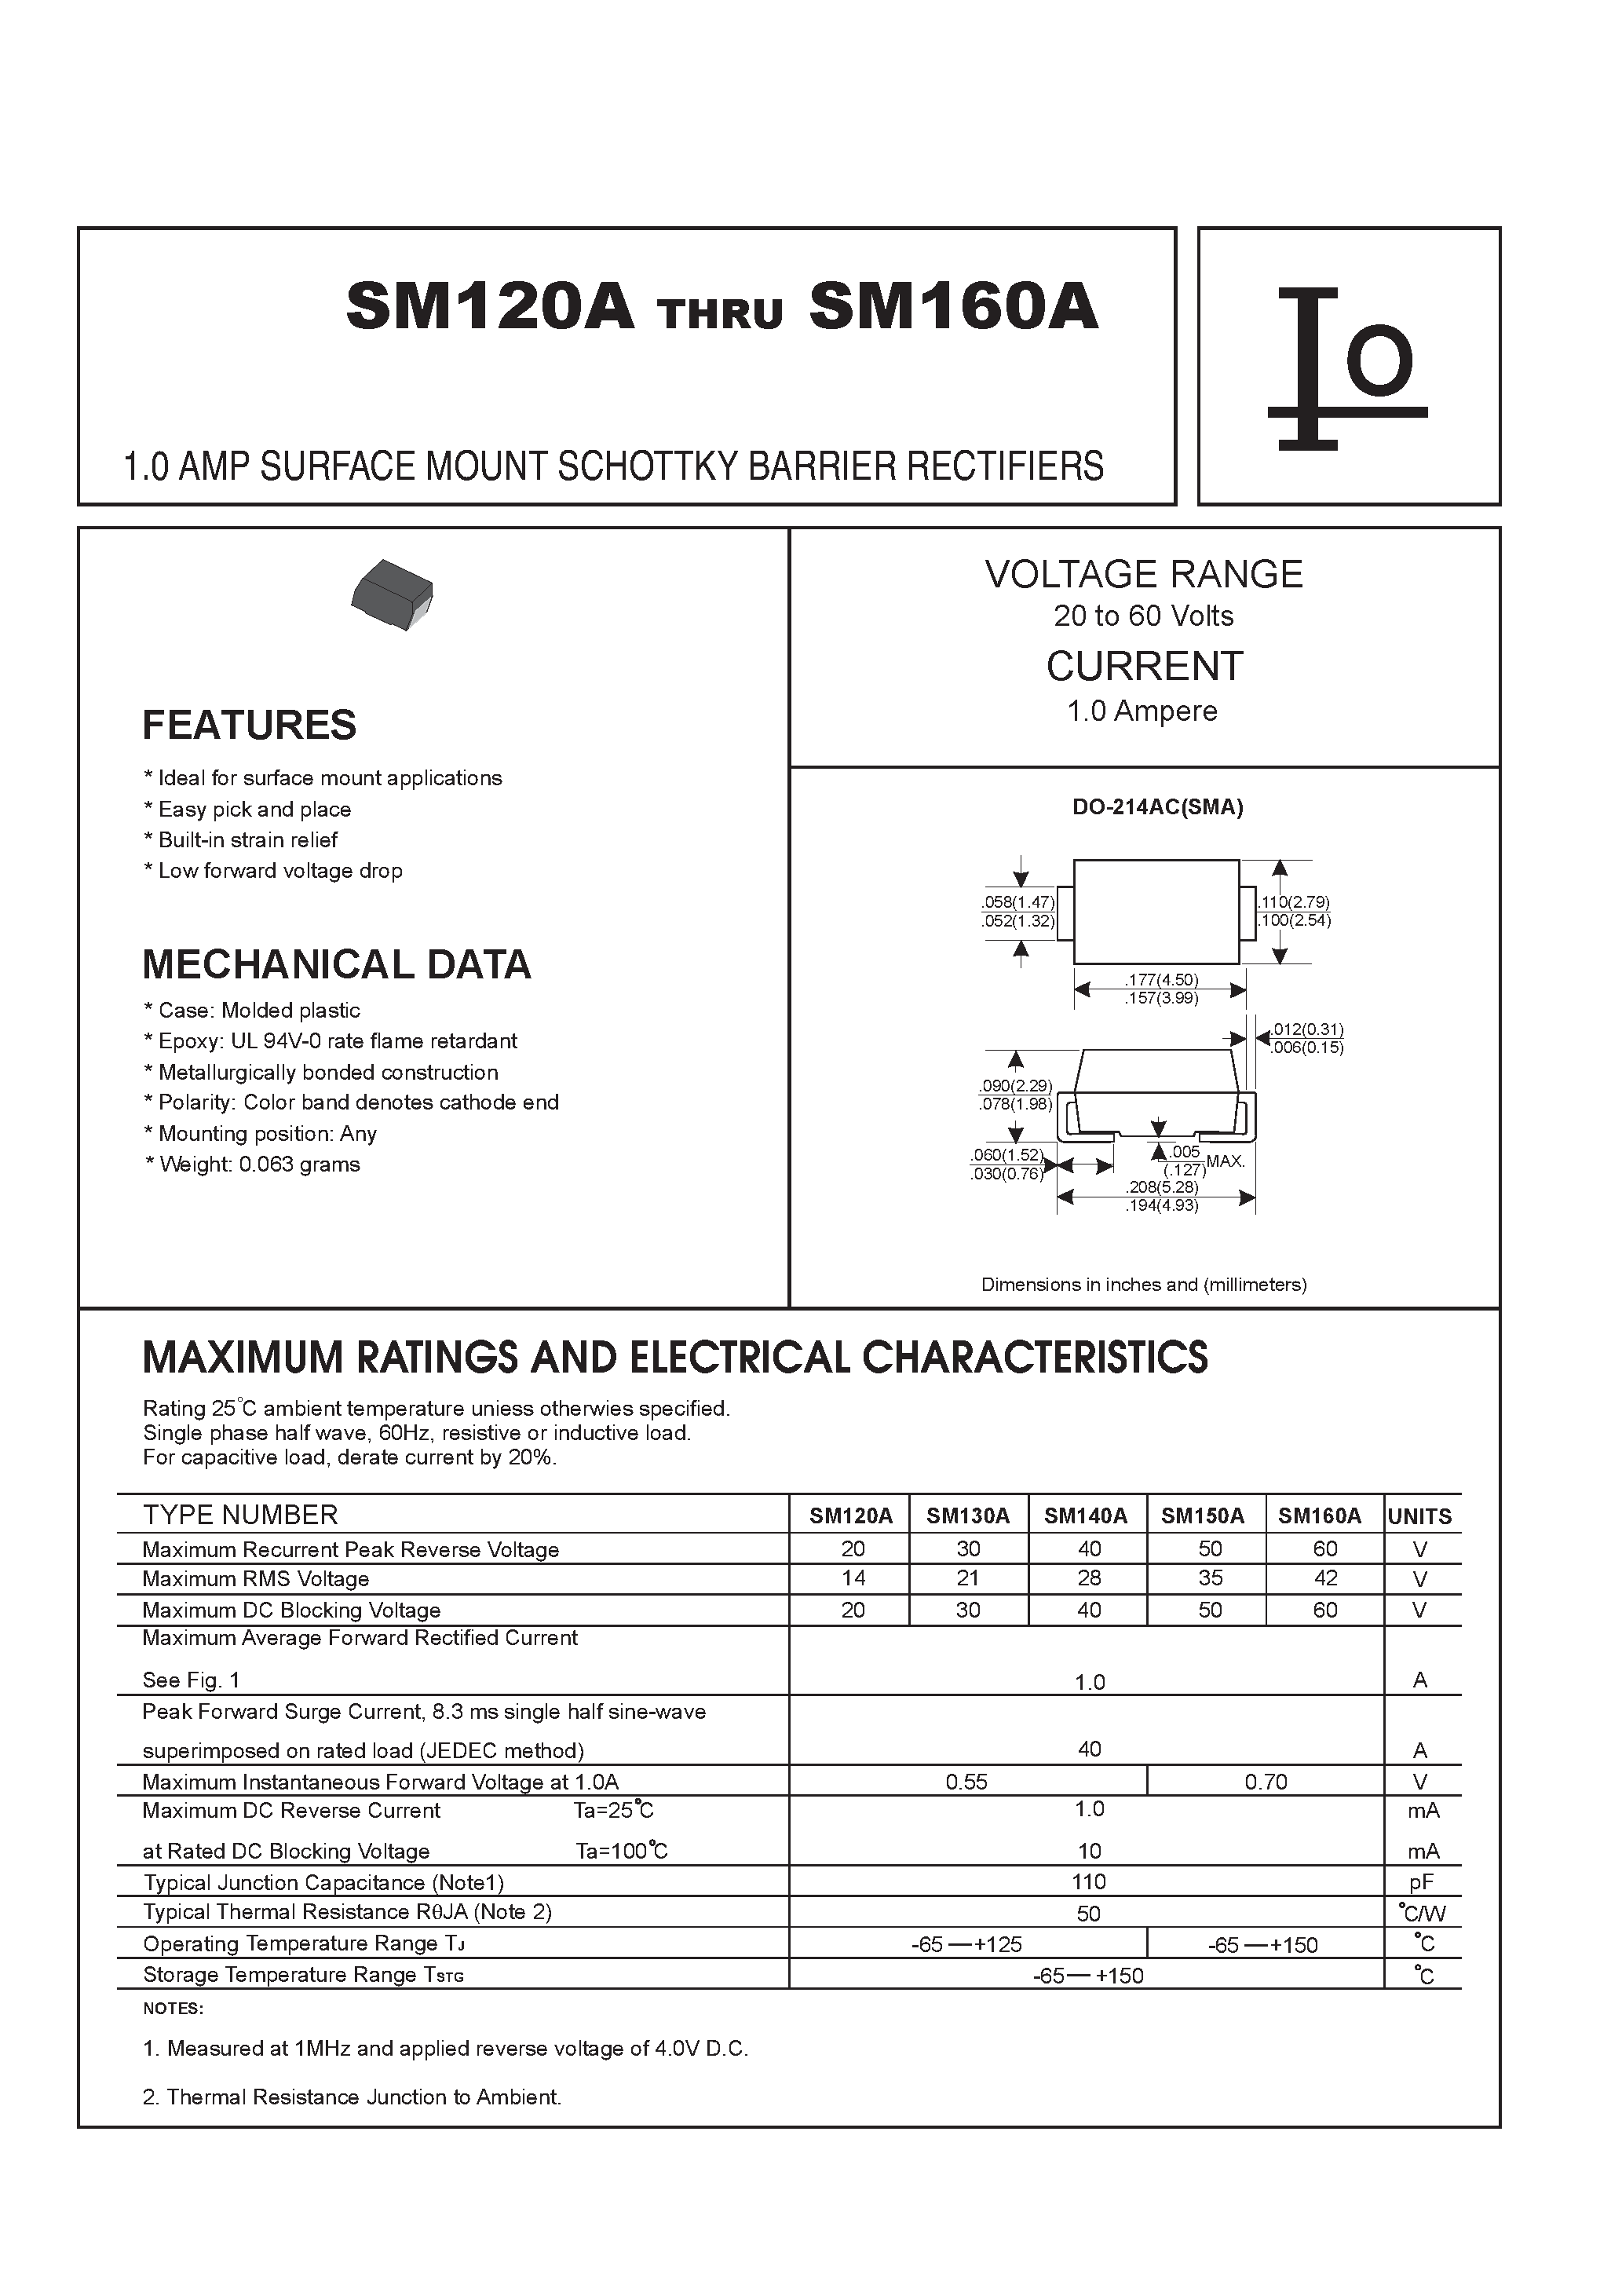 Datasheet SM130A - 1.0 AMP SURFACE MOUNT SCHOTTKY BARRIER RECTIFIERS page 1